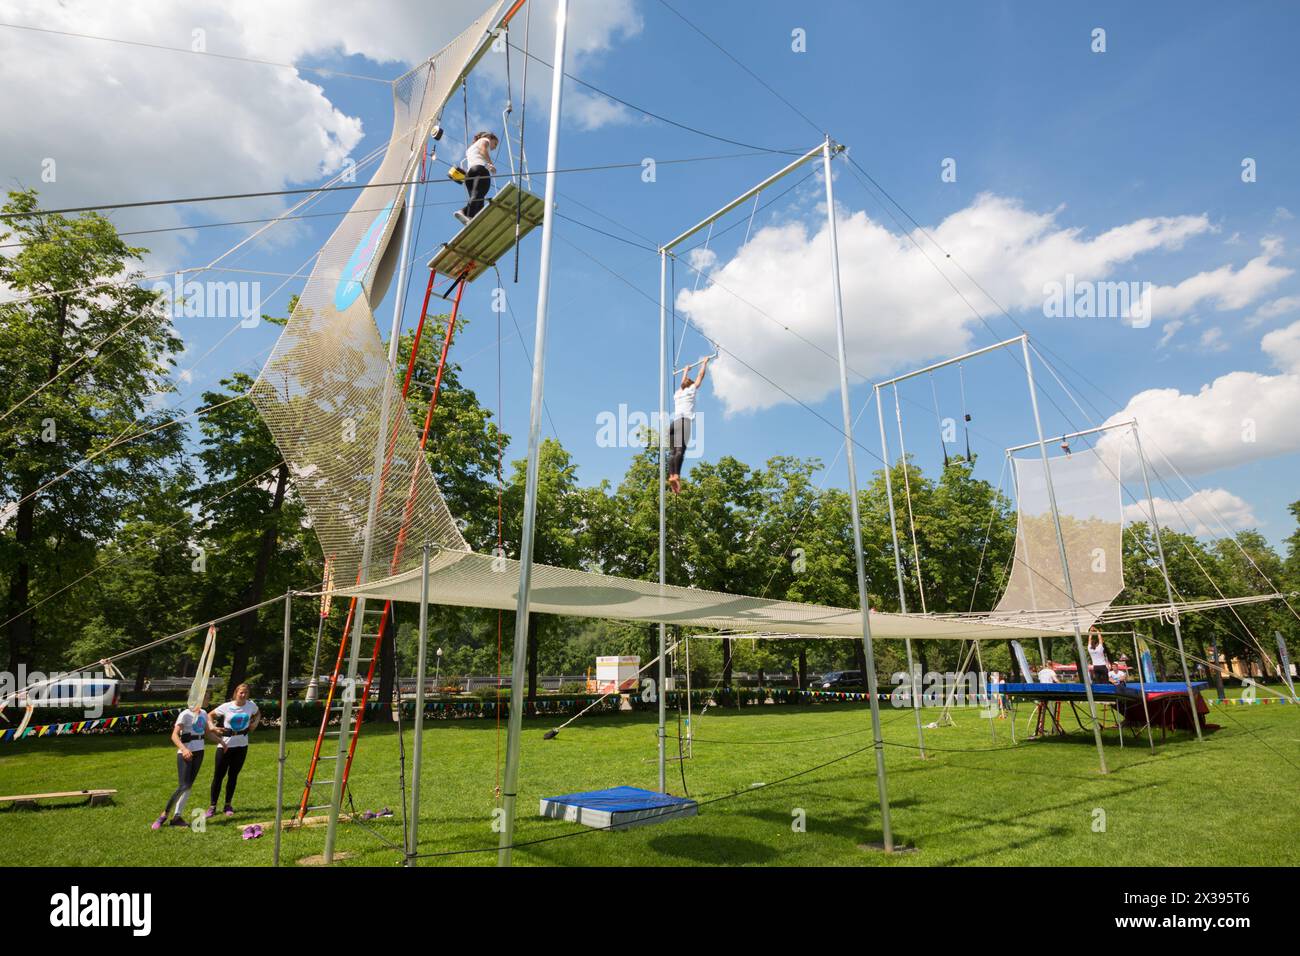 MOSCOW - MAY 26, 2016: Acrobats show on Trapeze. In Moscow, opened first in Russia trapeze for Air flight school and aerial gymnastics Trapeze Yota - Stock Photo